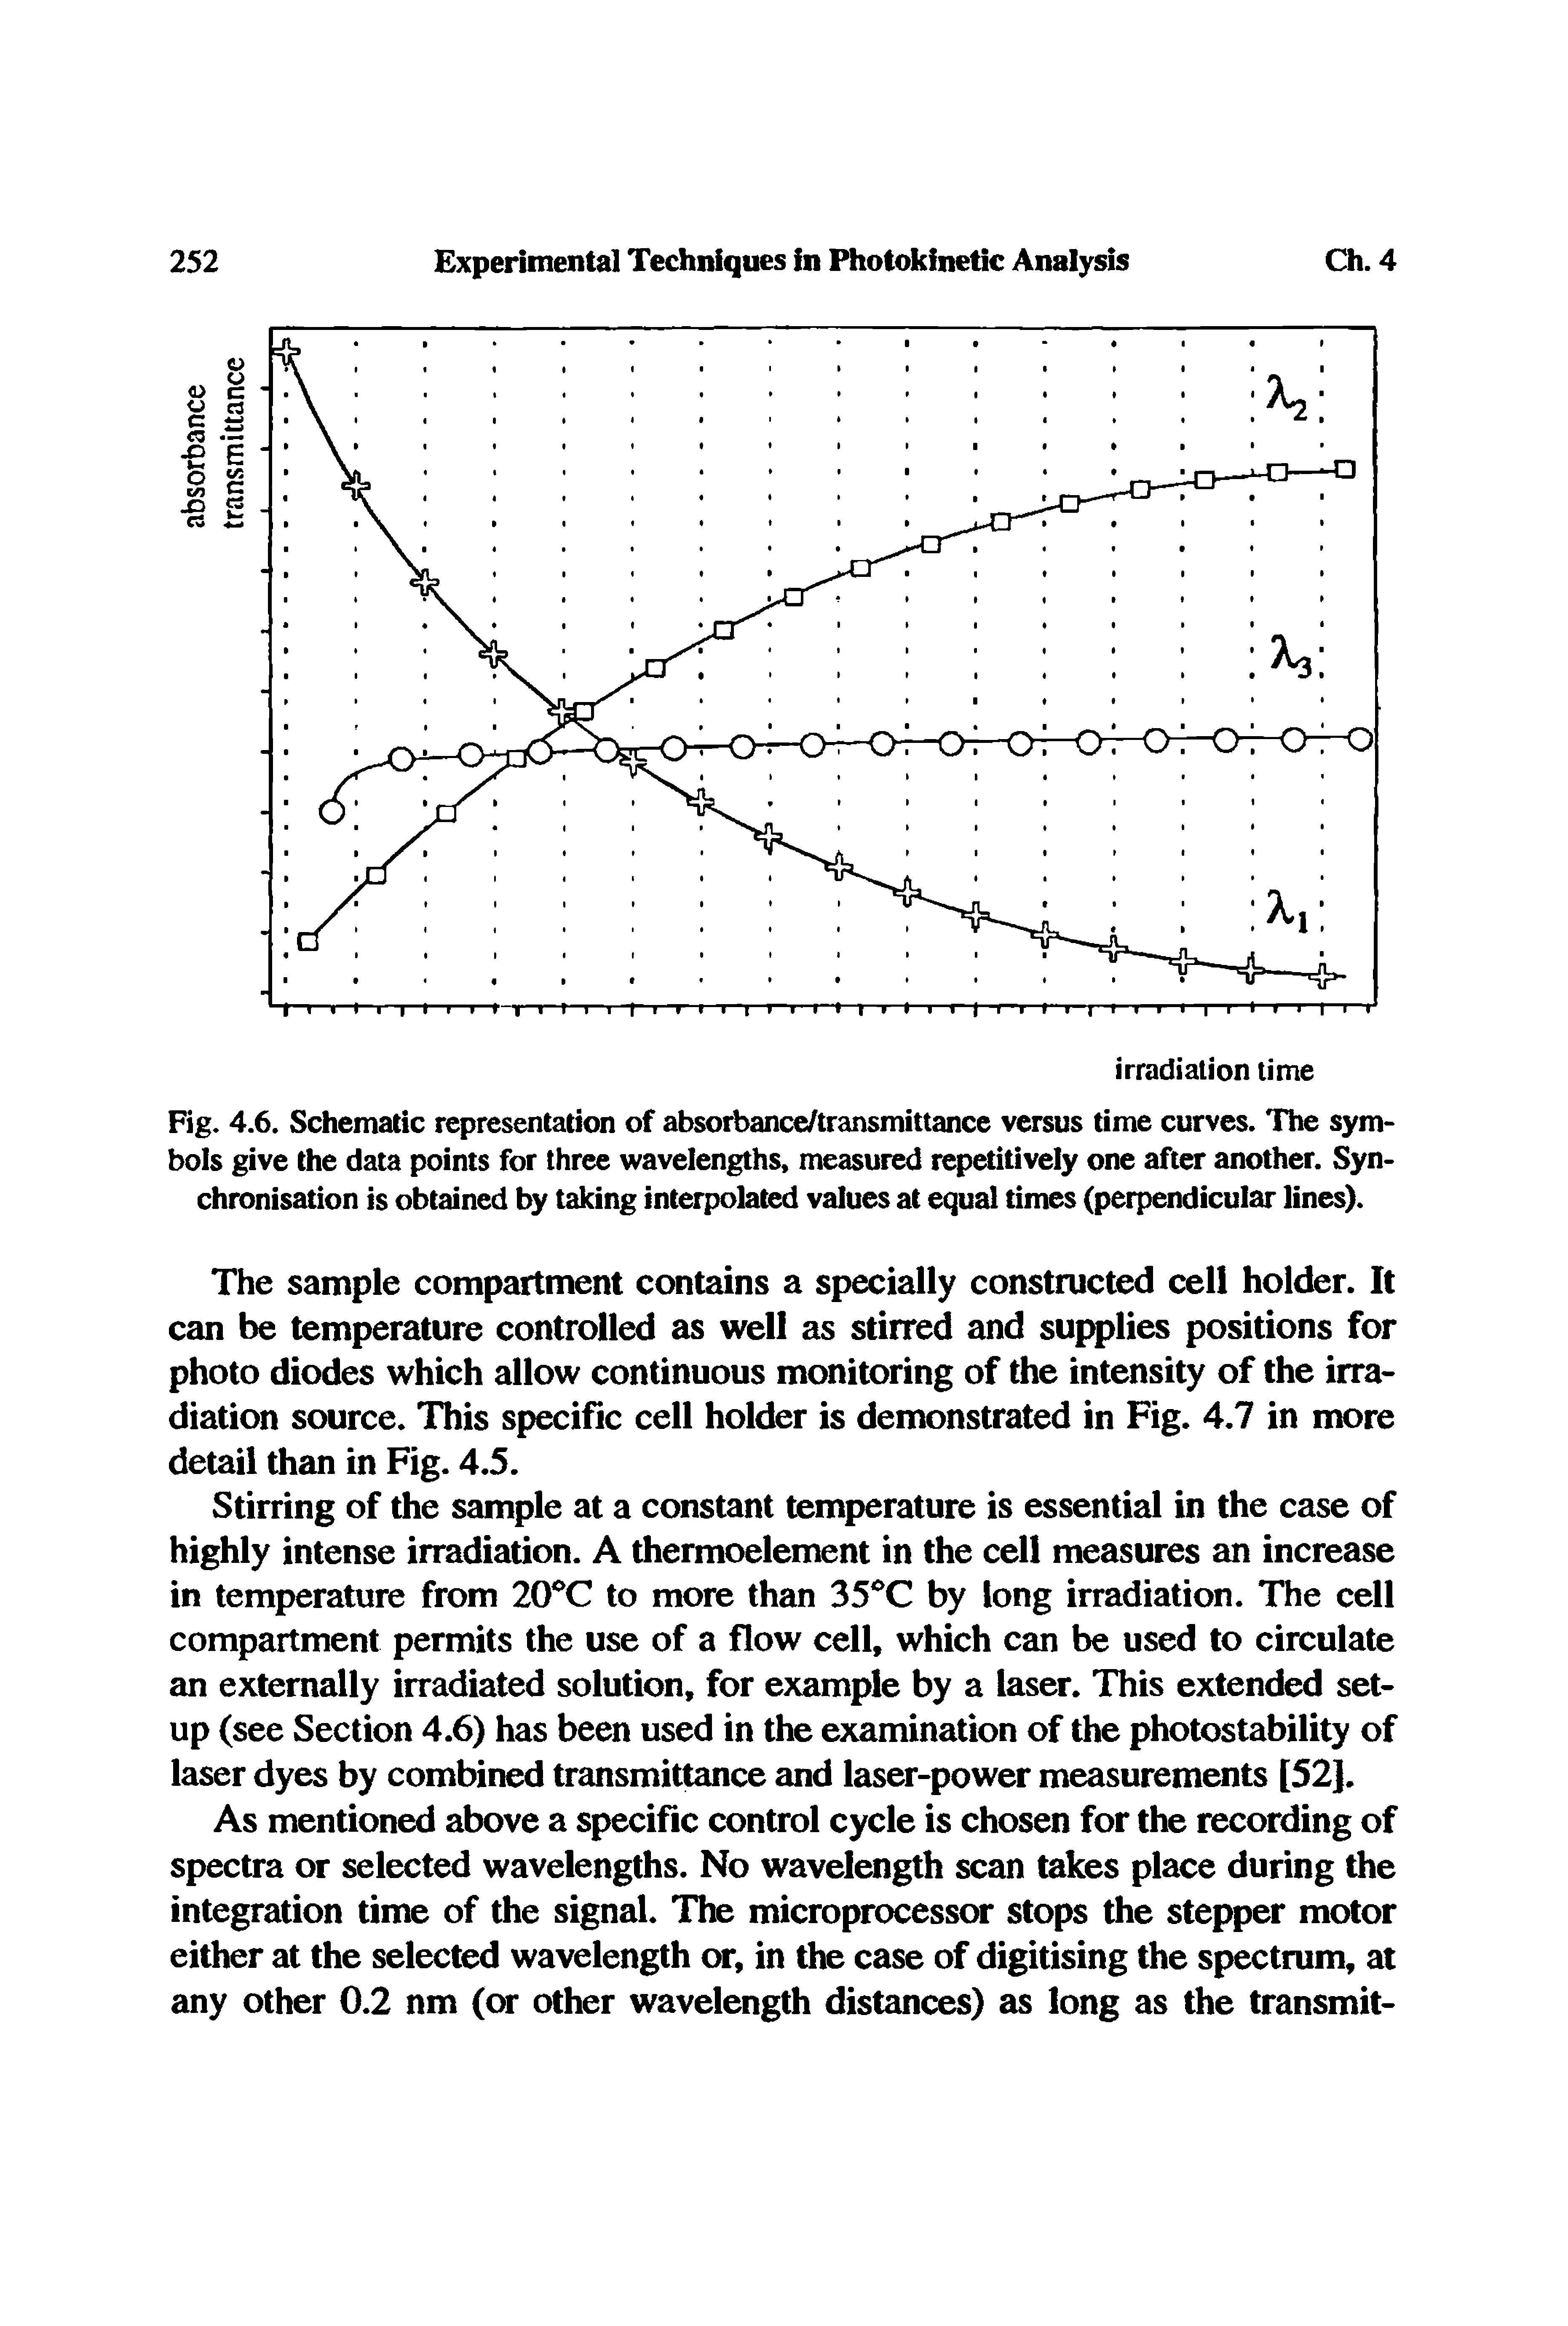 Fig. 4.6. Schematic representation of absorbance/transmittance versus time curves. The symbols give the data points for three wavelengths, measured r tively one after another. Synchronisation is obtained by taking int polated values at equal times (perpendicular lines).